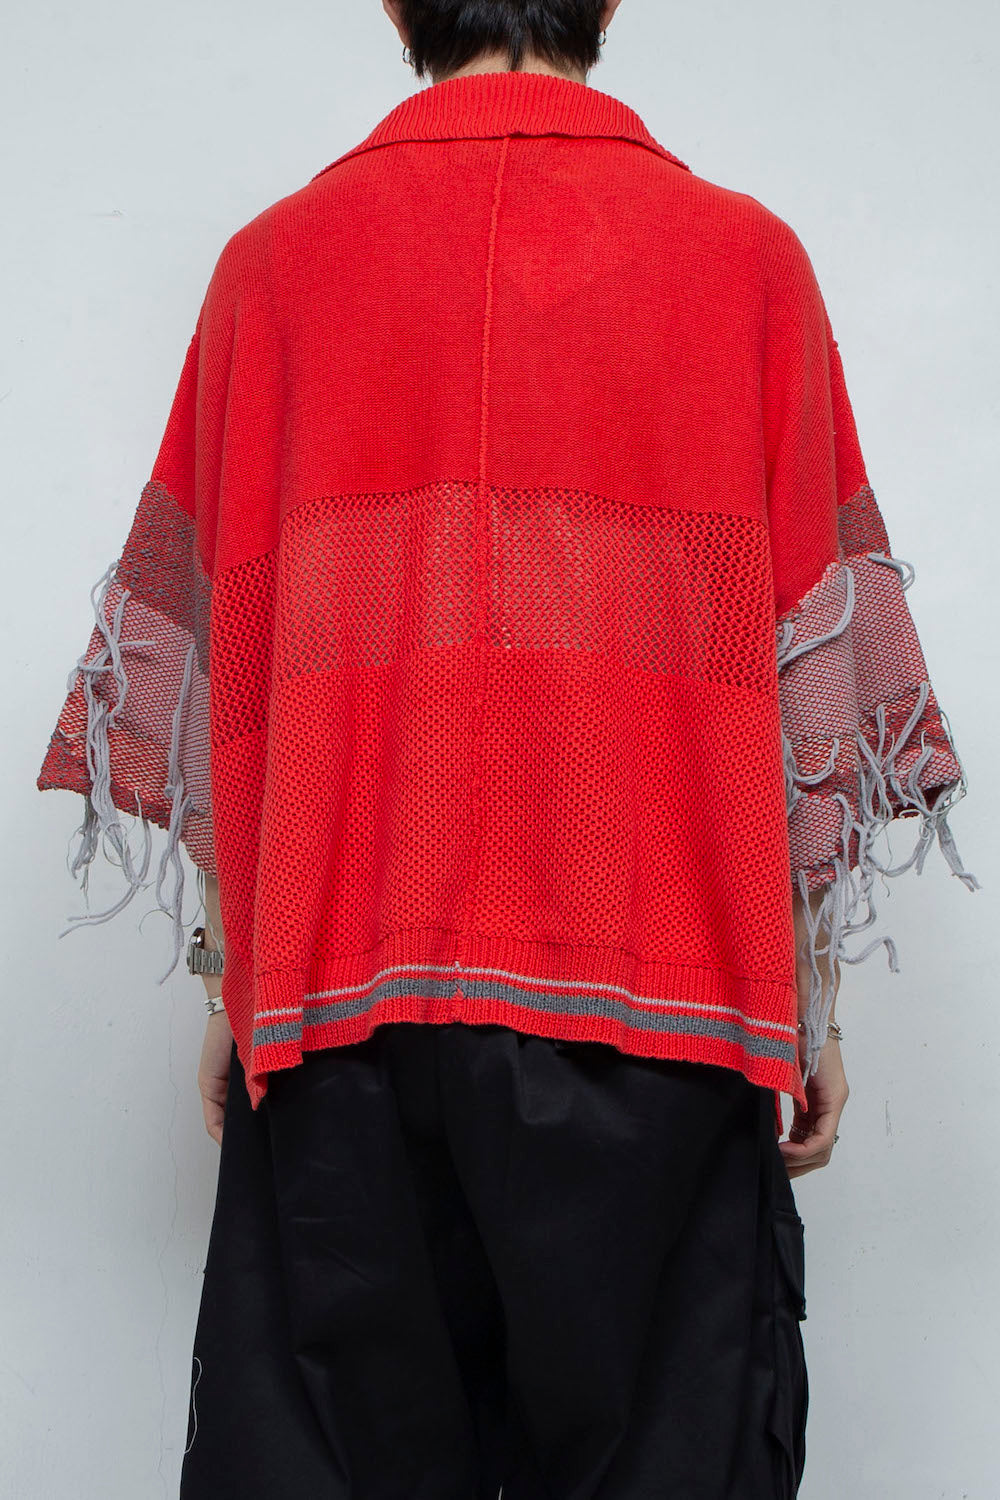 LB24SS-KNPS01-TRA-PS | Thread intarsia summer knit polo neck | RED ORANGE 